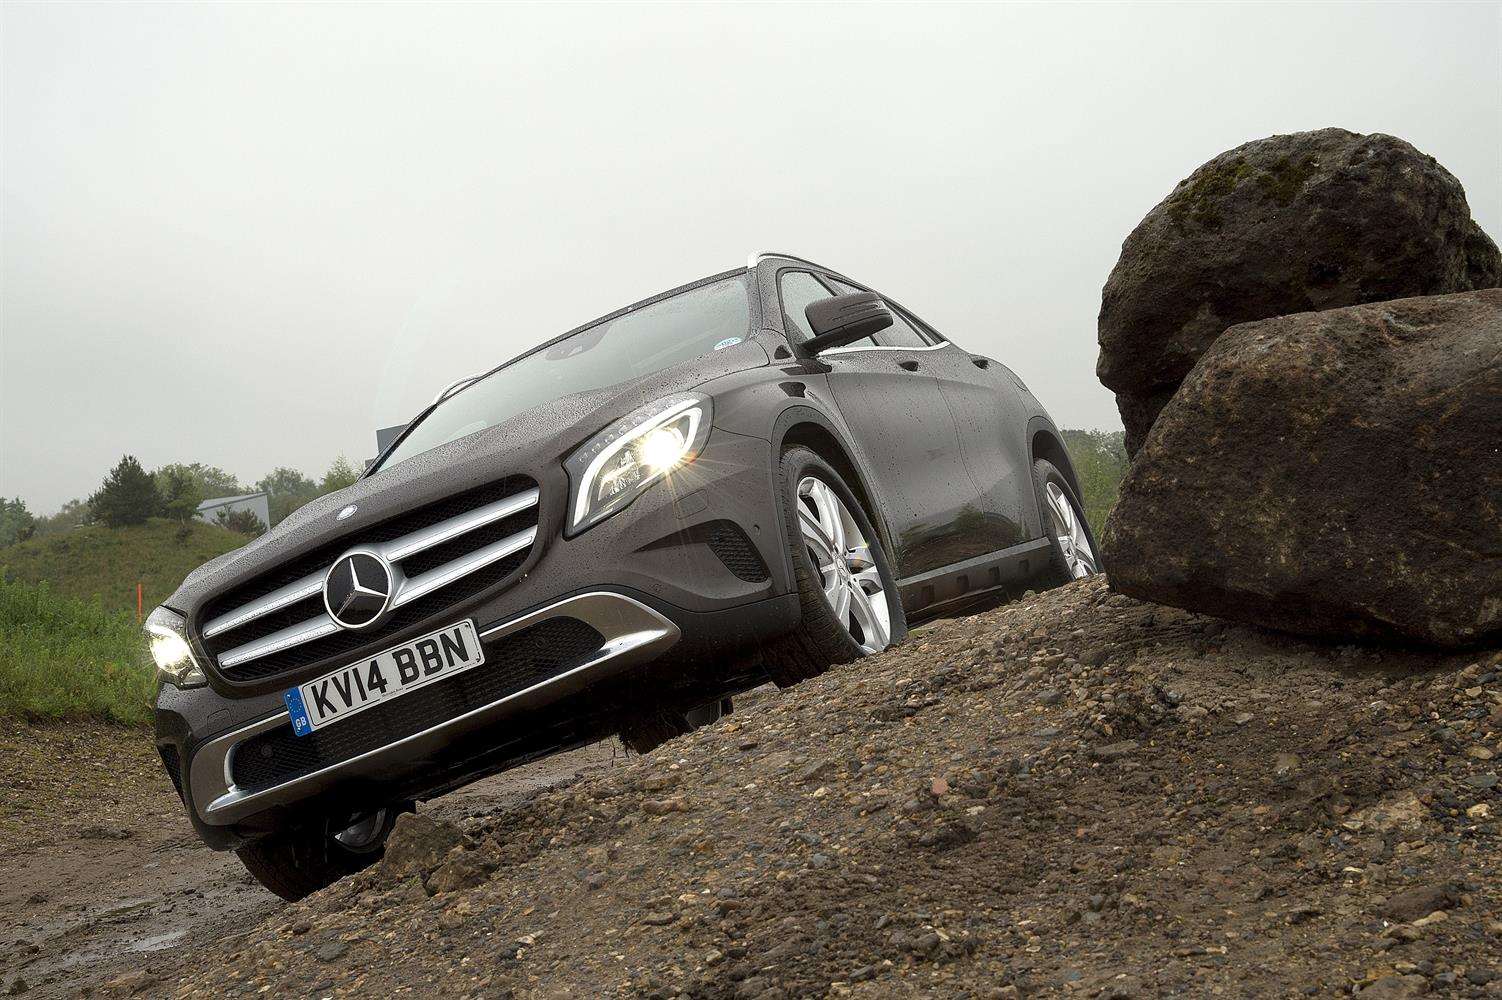 GLA220 CDI 4matic AMG being put through its paces